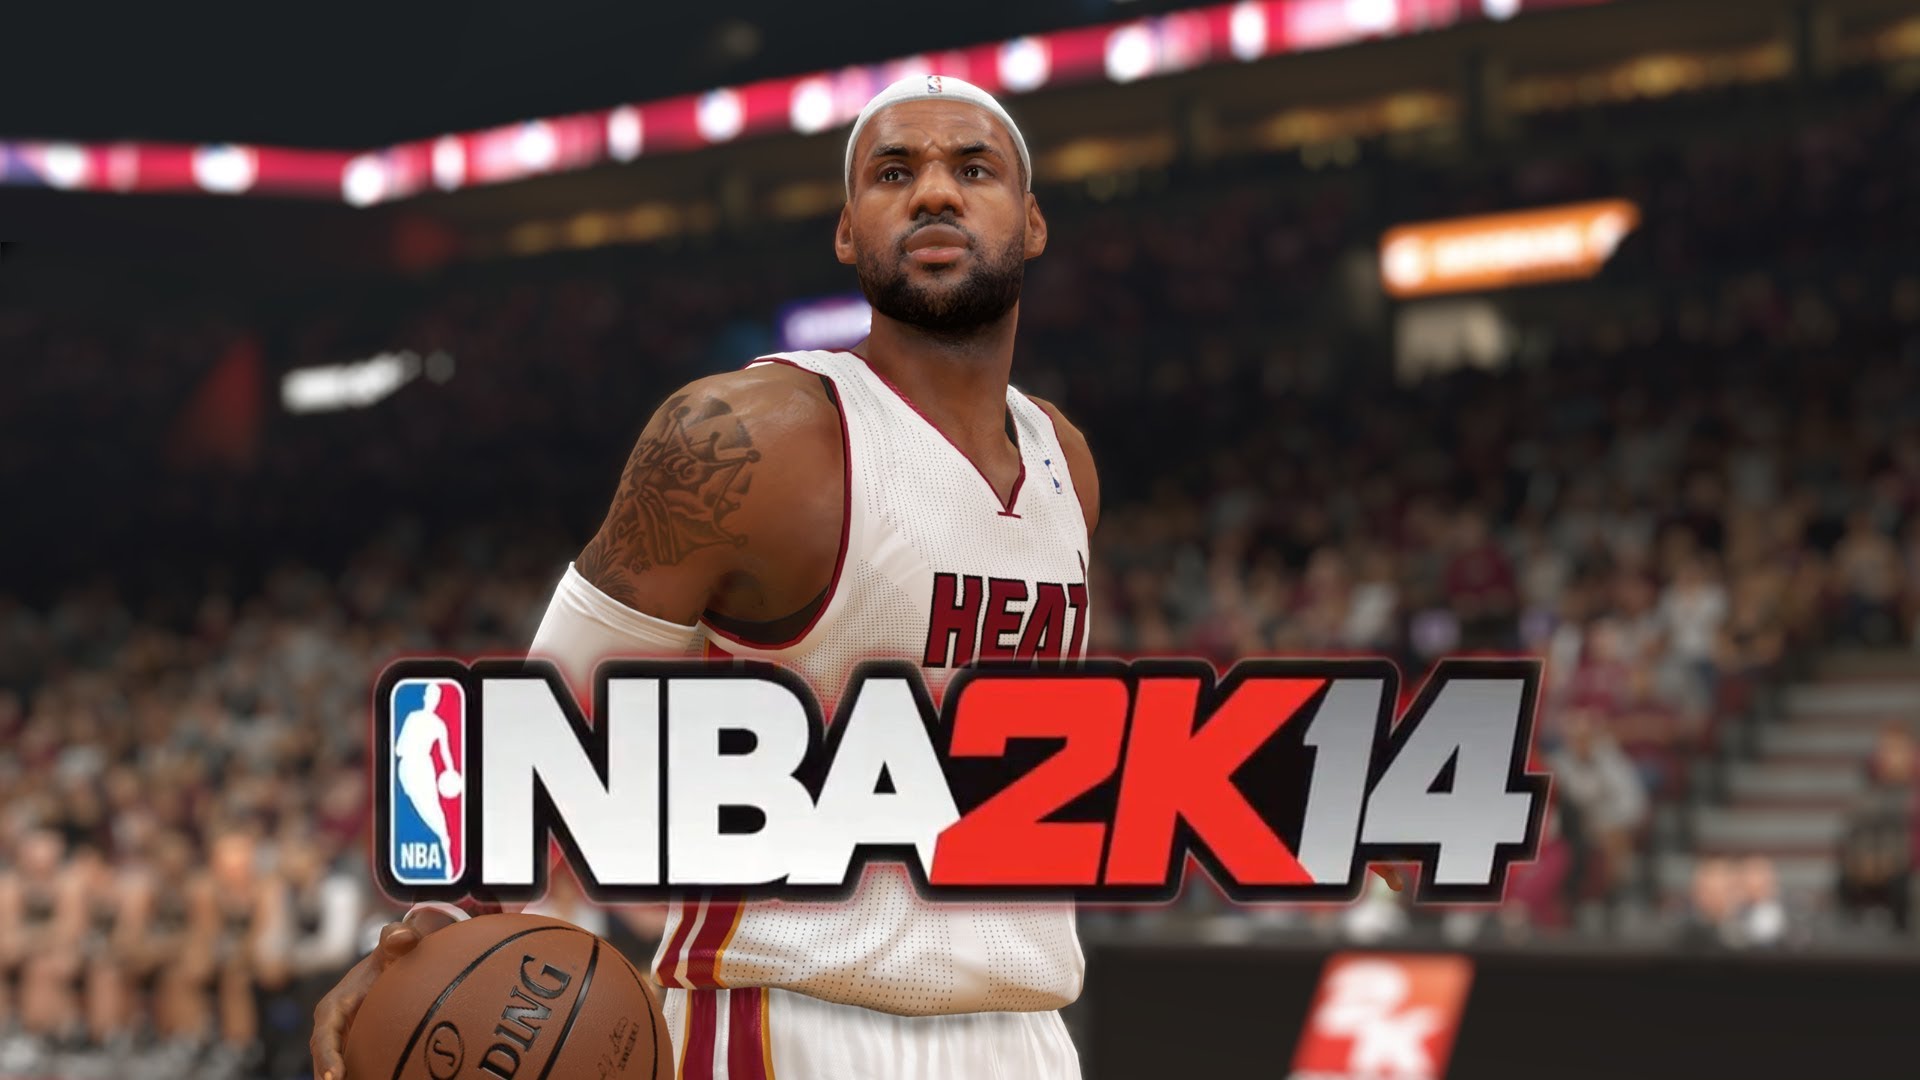 Amazing NBA 2K14 Pictures & Backgrounds